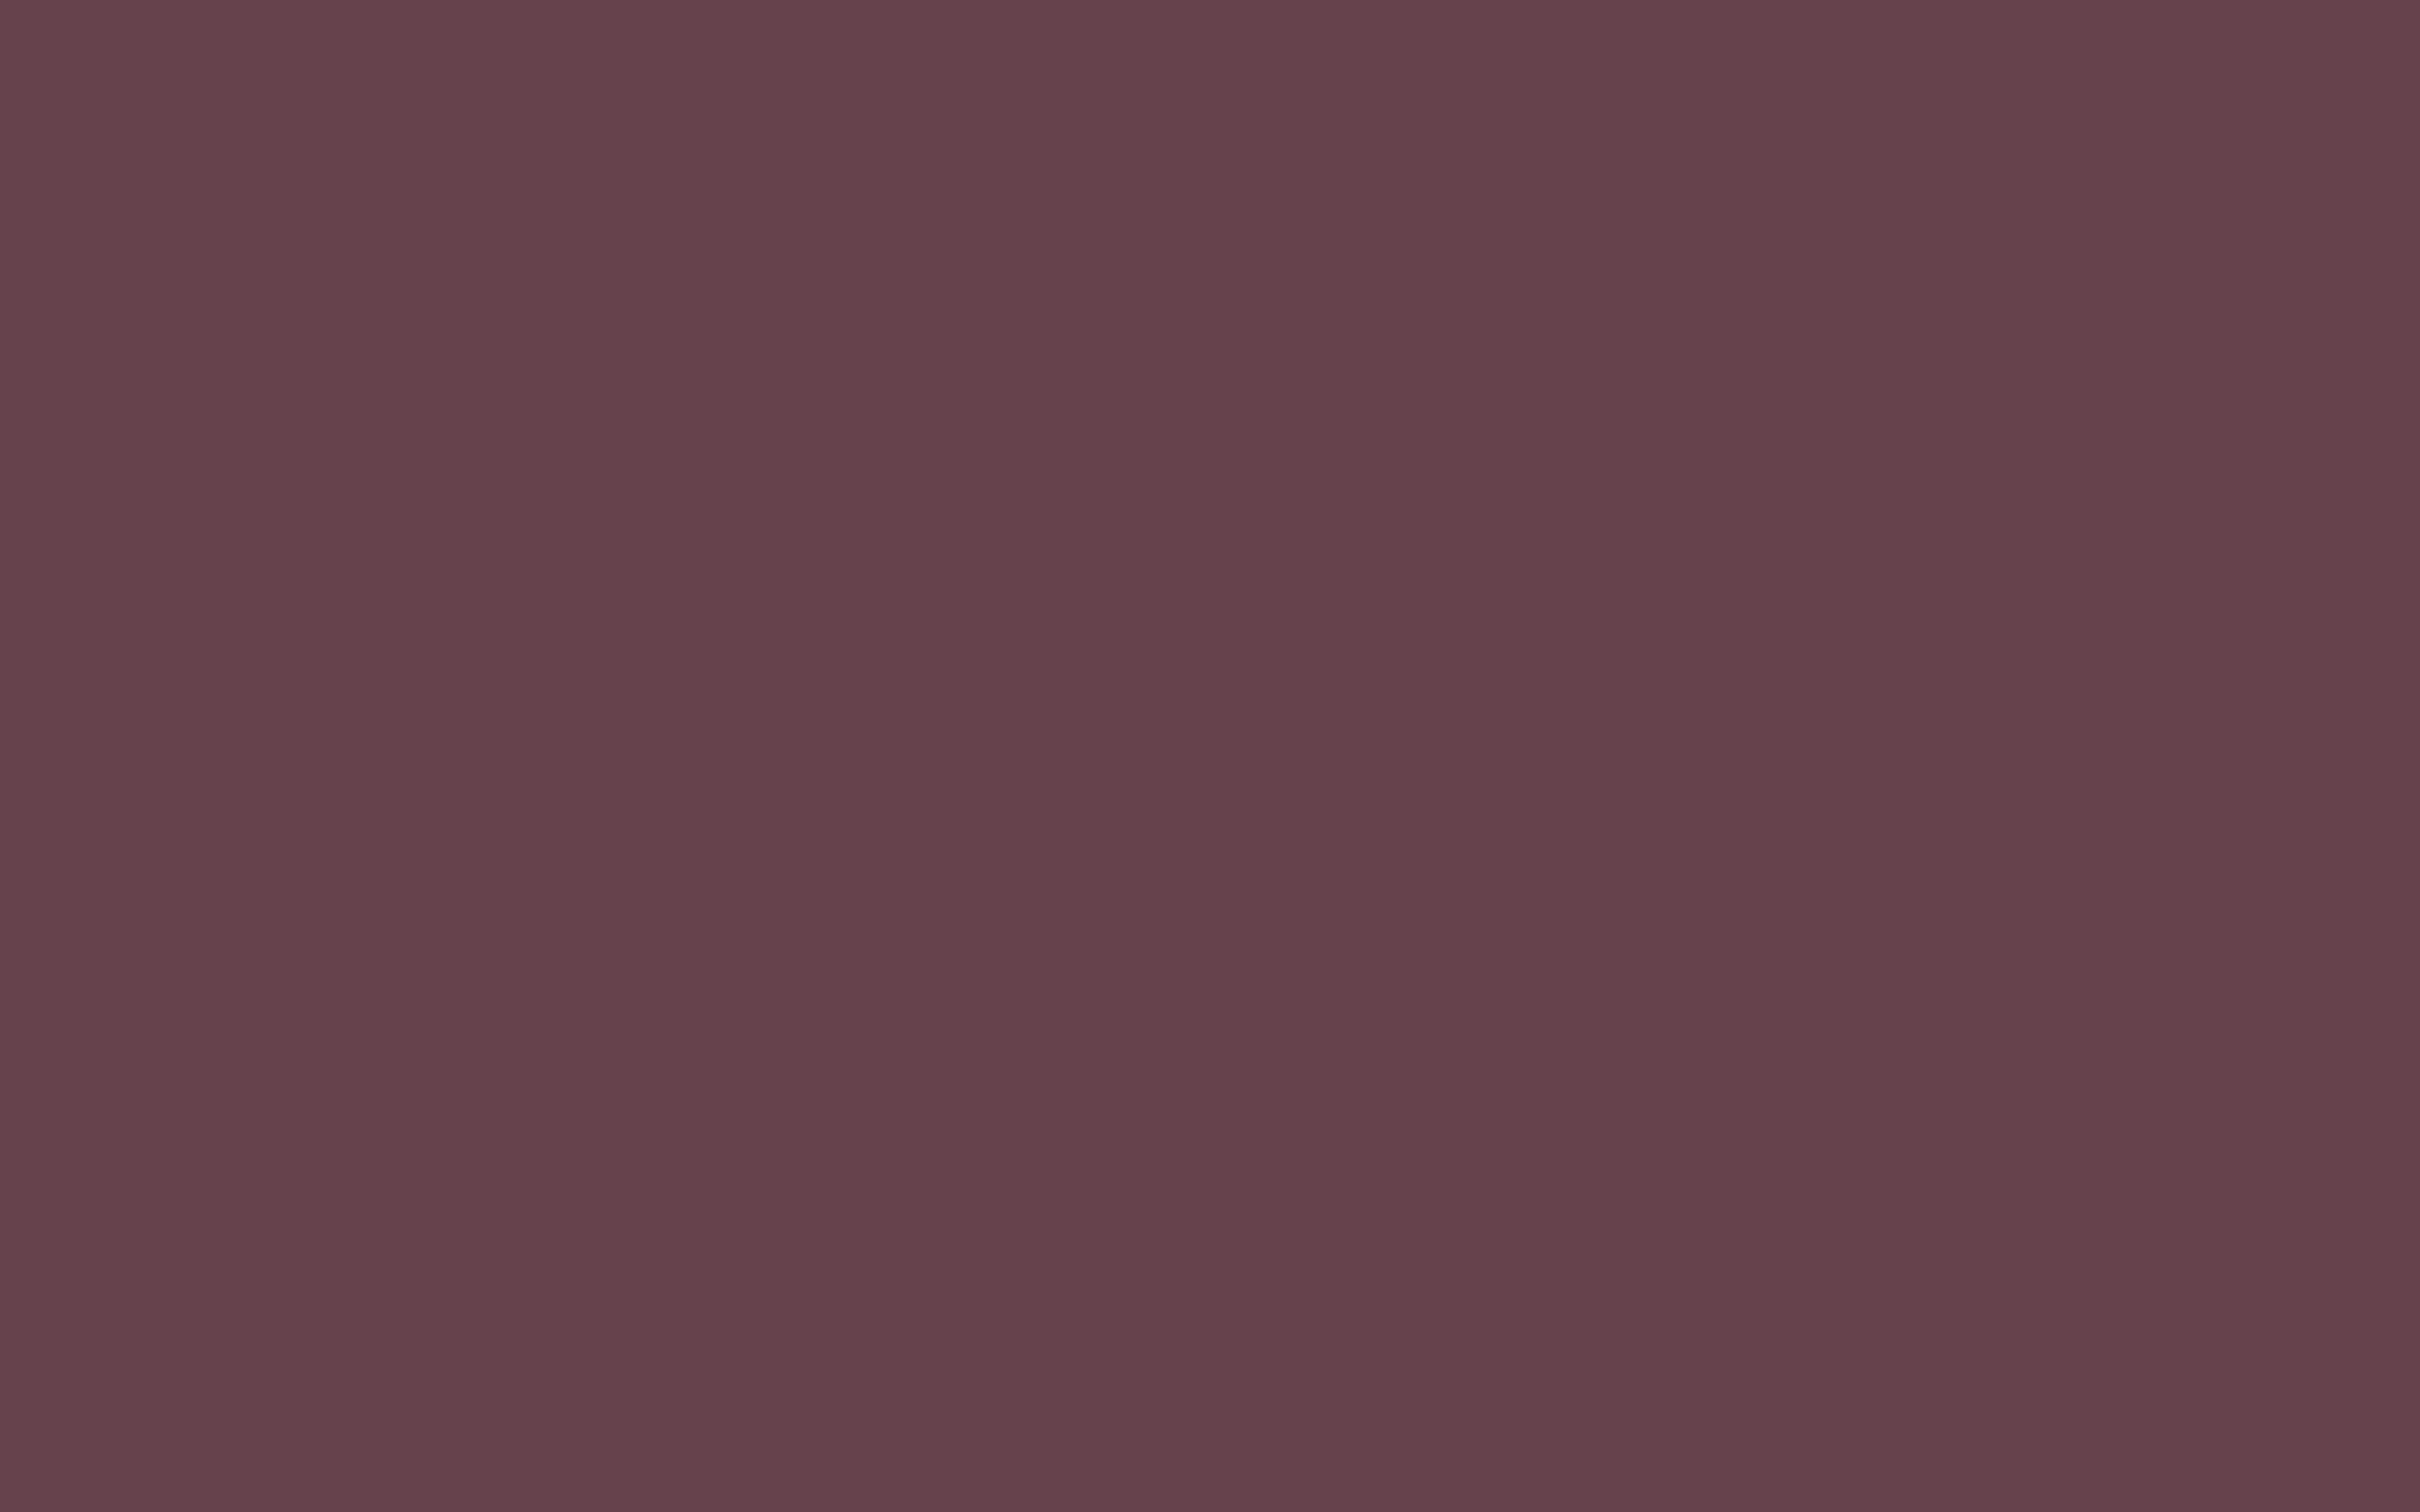 2560x1600 Deep Tuscan Red Solid Color Background